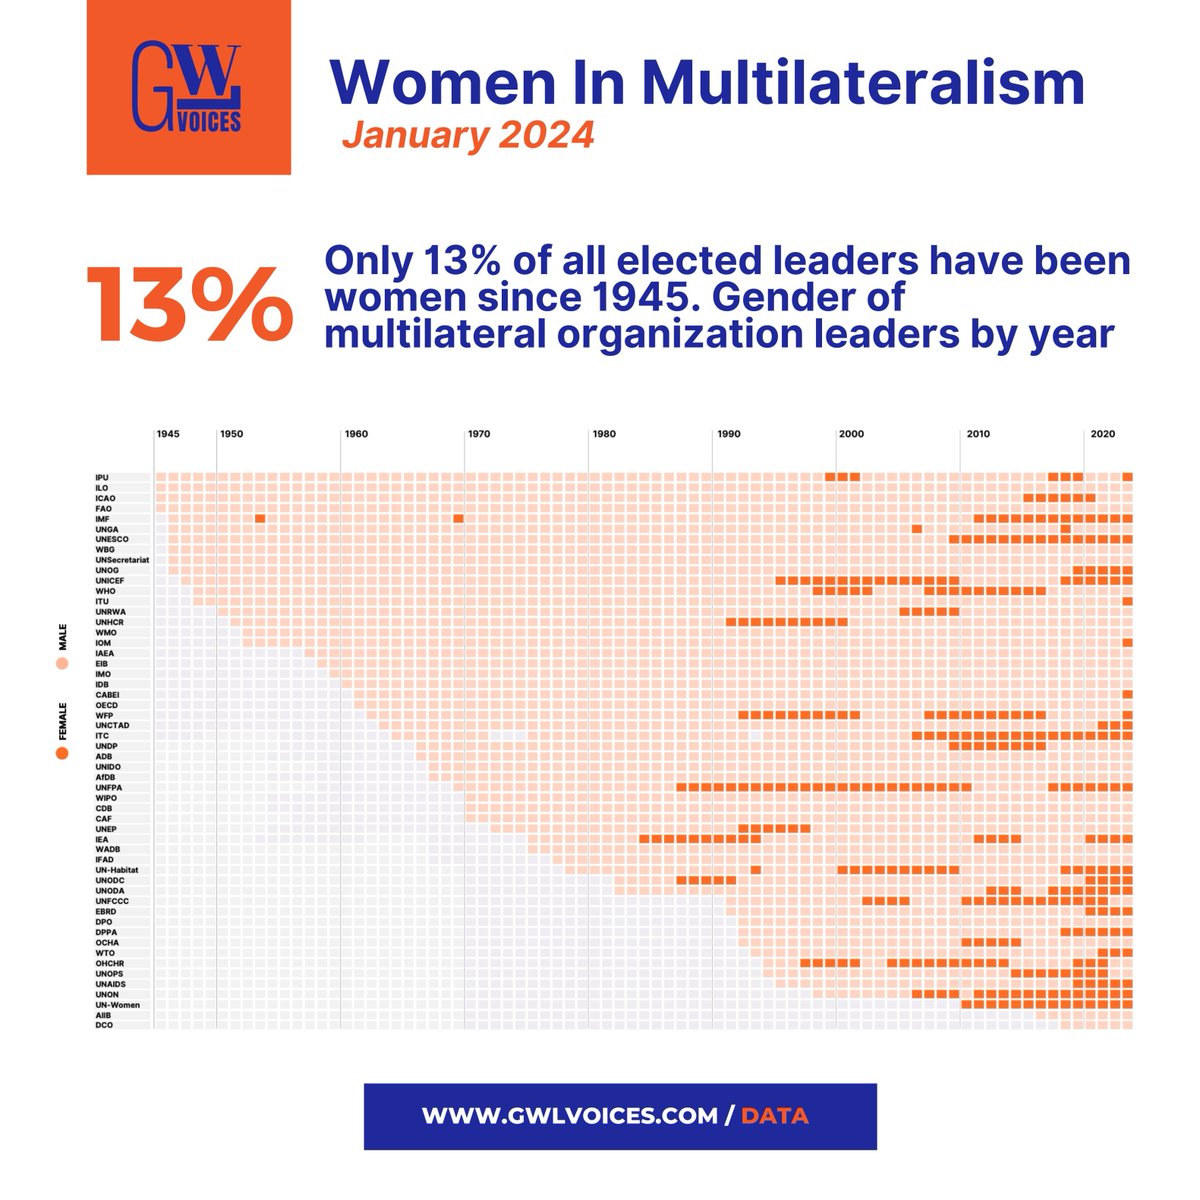 Most of the power in multilateral organizations rests in boardrooms and senior management teams behind closed doors. Our new study shows how present women are in these spaces. Discover the data behind #Women in Multilateralism 2024 gwlvoices.com/data/